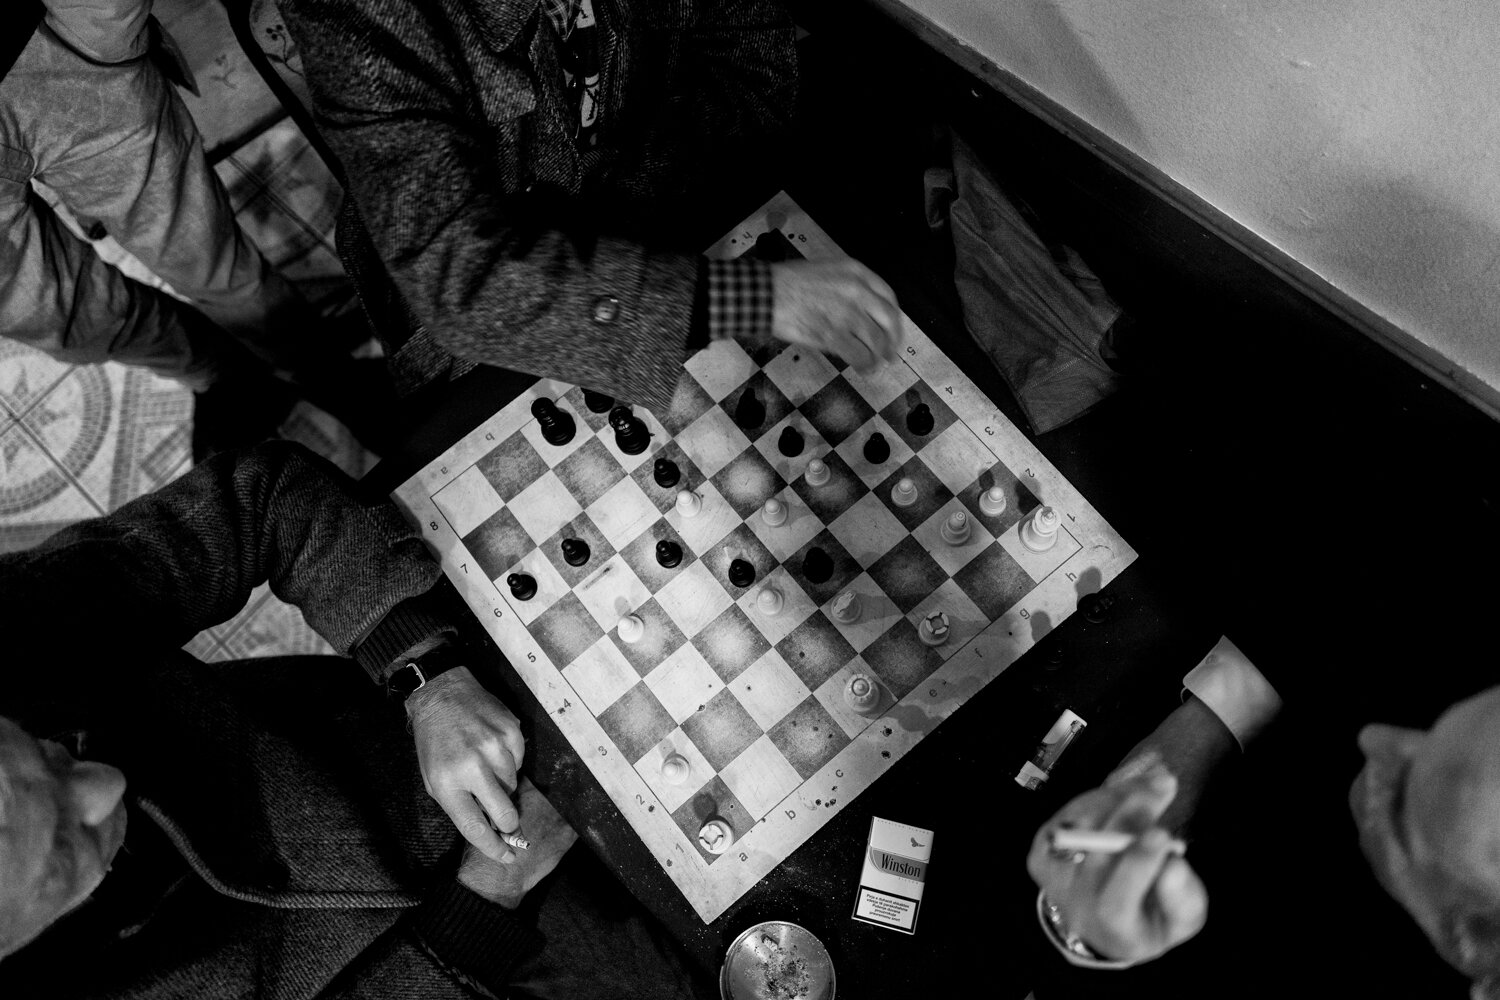  Klub Schach (chess club) is part café, part community center. It is a place for friends to socialize, smoke, and play chess, dominoes, or cards. 2017. 